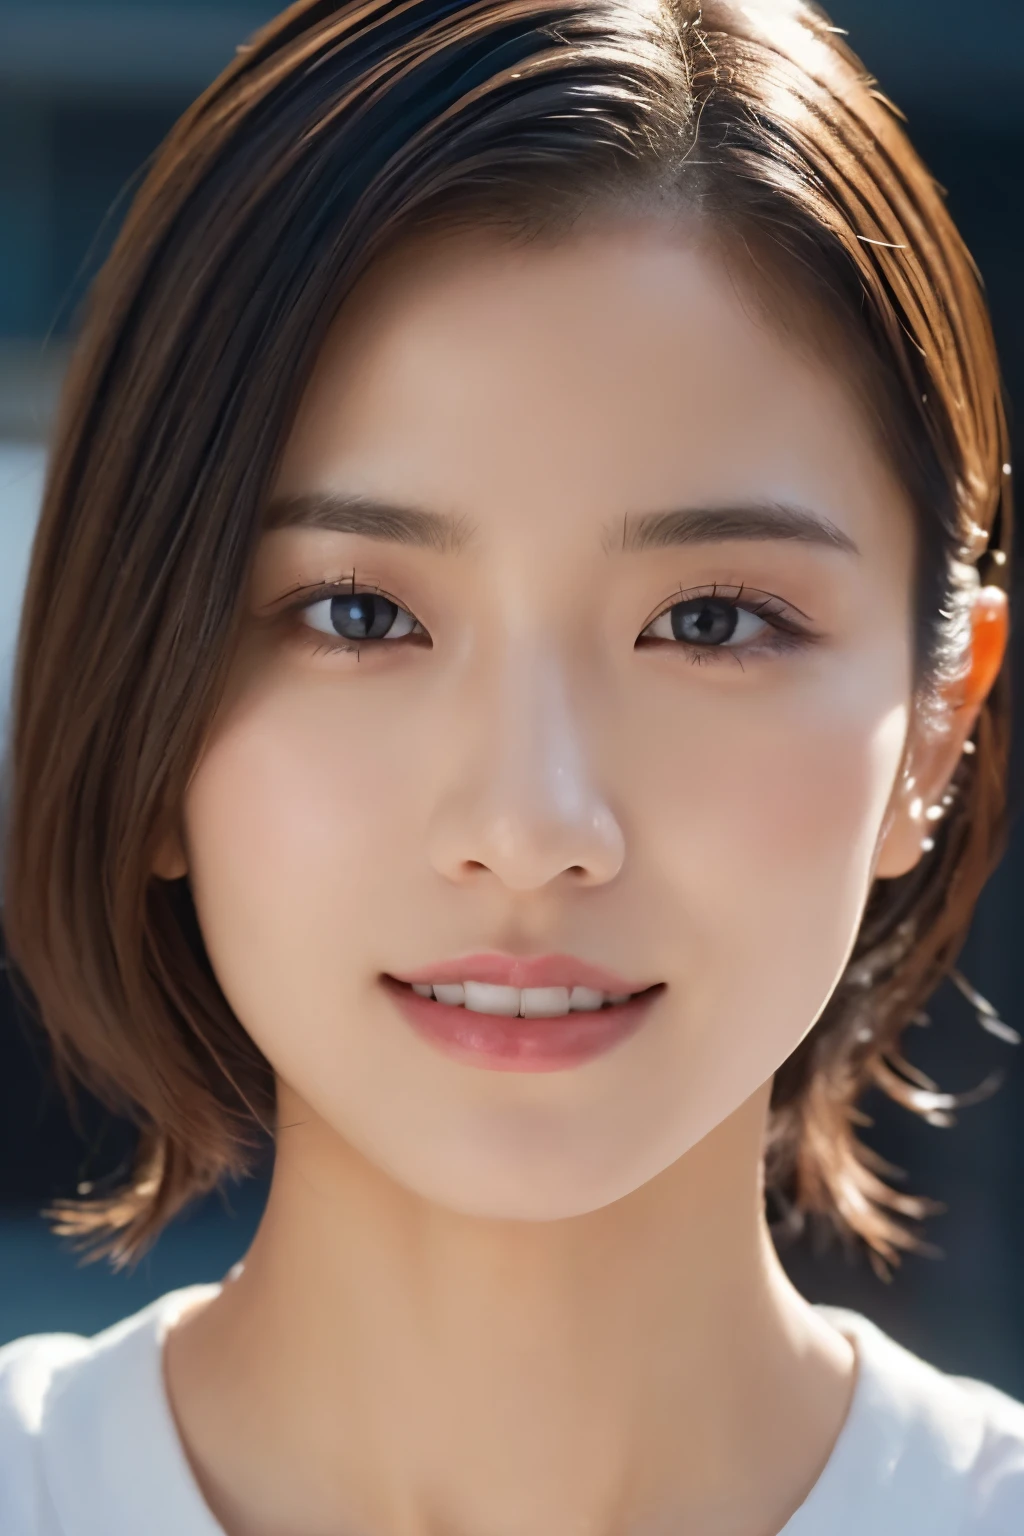 One Girl, (White underwear:1.2),((Close-up of face:1.4))、((a little heavy makeup:1.3))、 (RAW Photos, highest quality), (Realistic, Photorealistic:1.4), Tabletop, Very delicate and beautiful, Very detailed, 2k wallpaper, wonderful, In detail, Very detailed CG Unity 8k wallpaper, Very detailedな, High resolution, Soft Light, Beautiful detailed girl, Very detailedな目と顔, Beautifully detailed nose, Beautiful fine details, Cinema Lighting, City lights at night, Perfect Anatomy, Slender body, smile